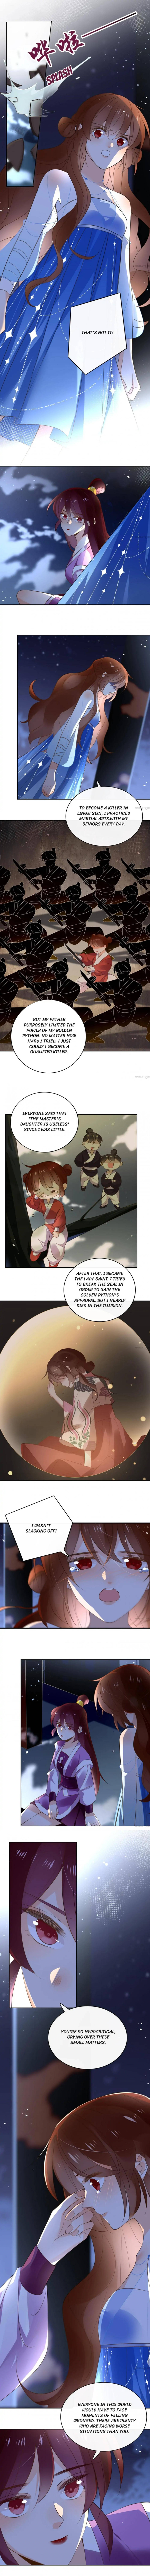 Take Me In, My Lord - Page 1